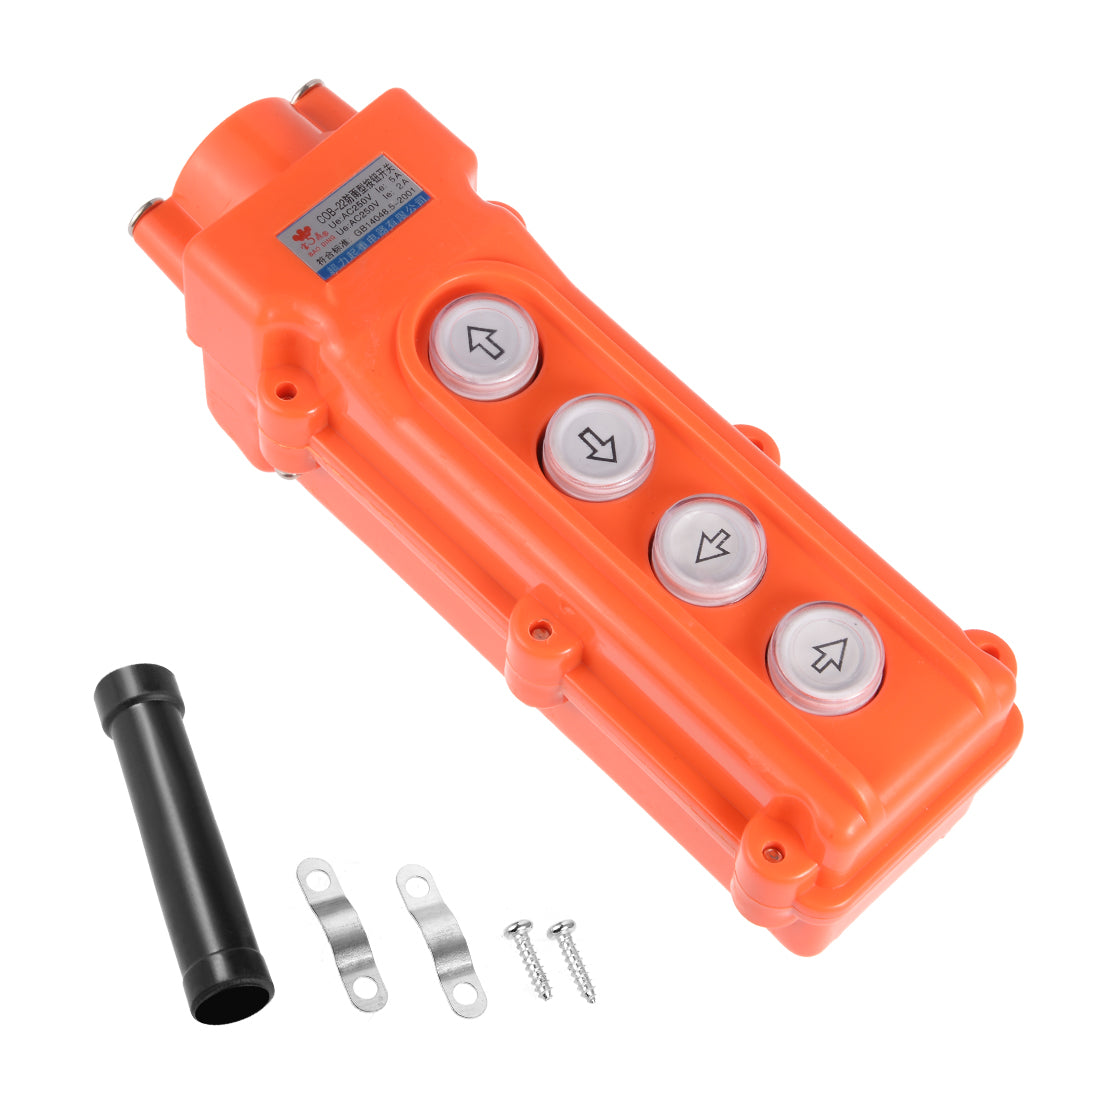 uxcell Uxcell Hoist Crane Pendant Control Station Push Button Switch Up Down Left Right 4 Ways Orange ABS